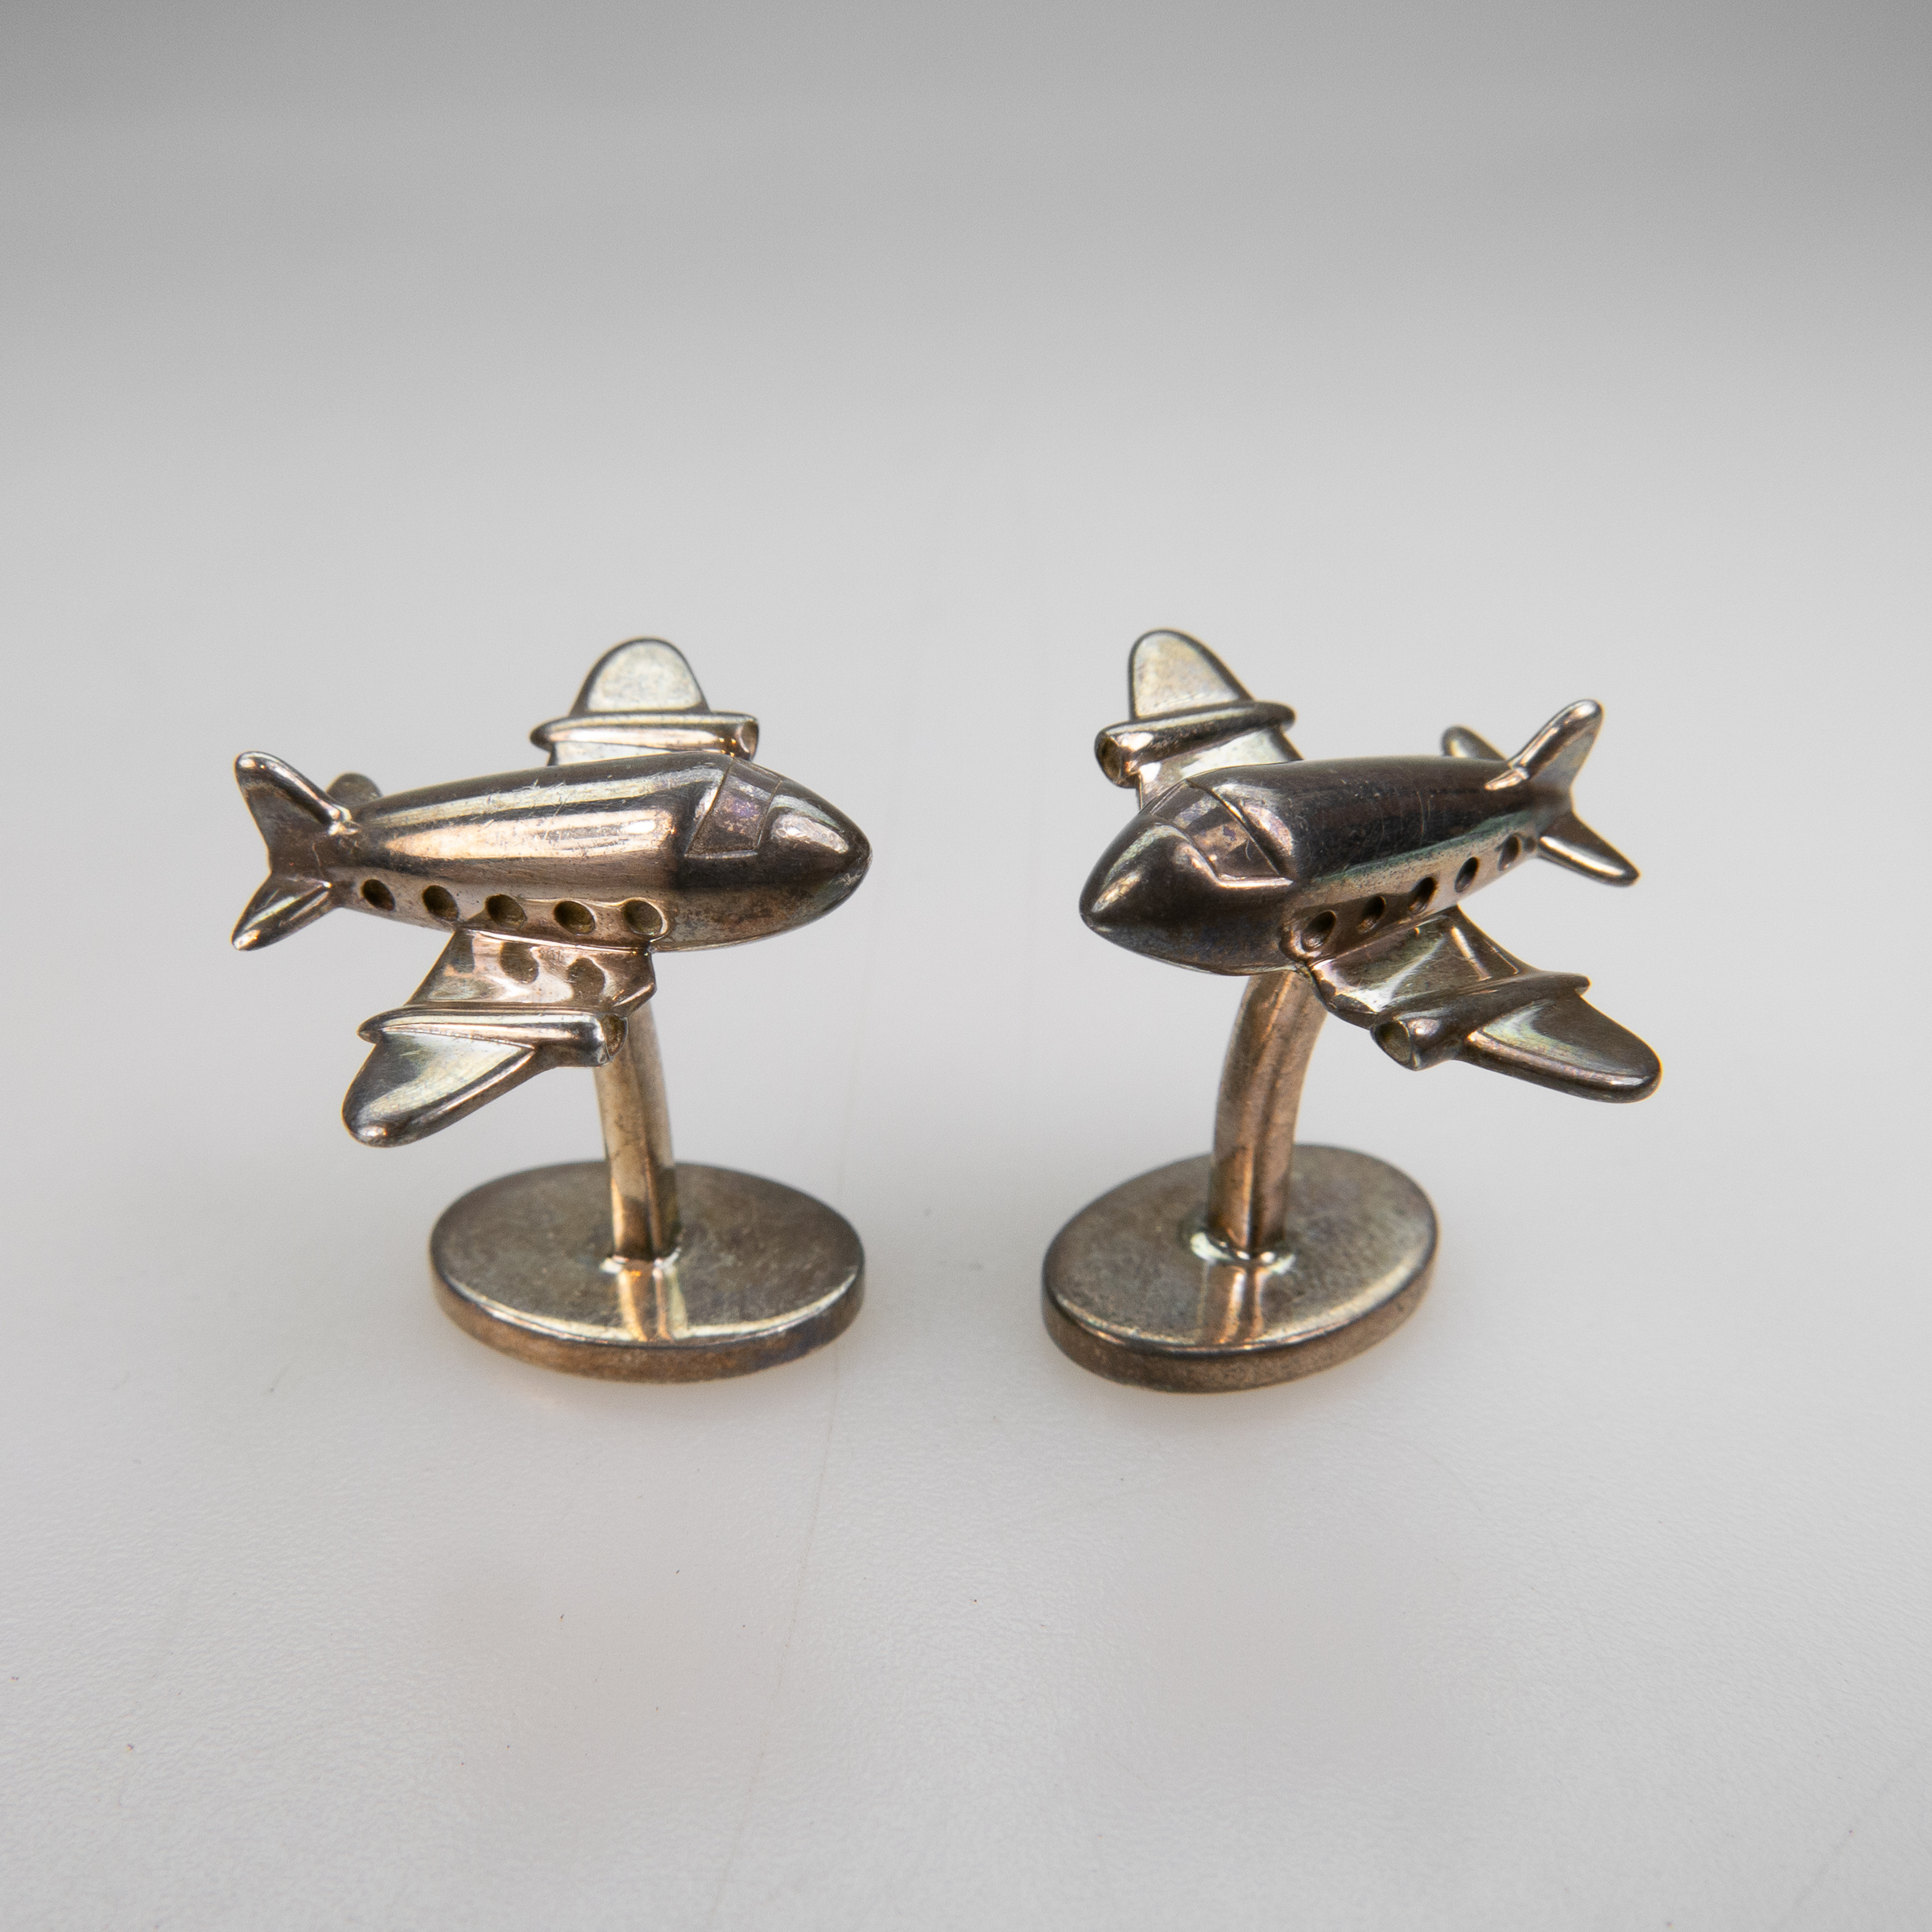 Pair Of Tiffany & Co. Sterling Silver 'Airplane' Cufflinks